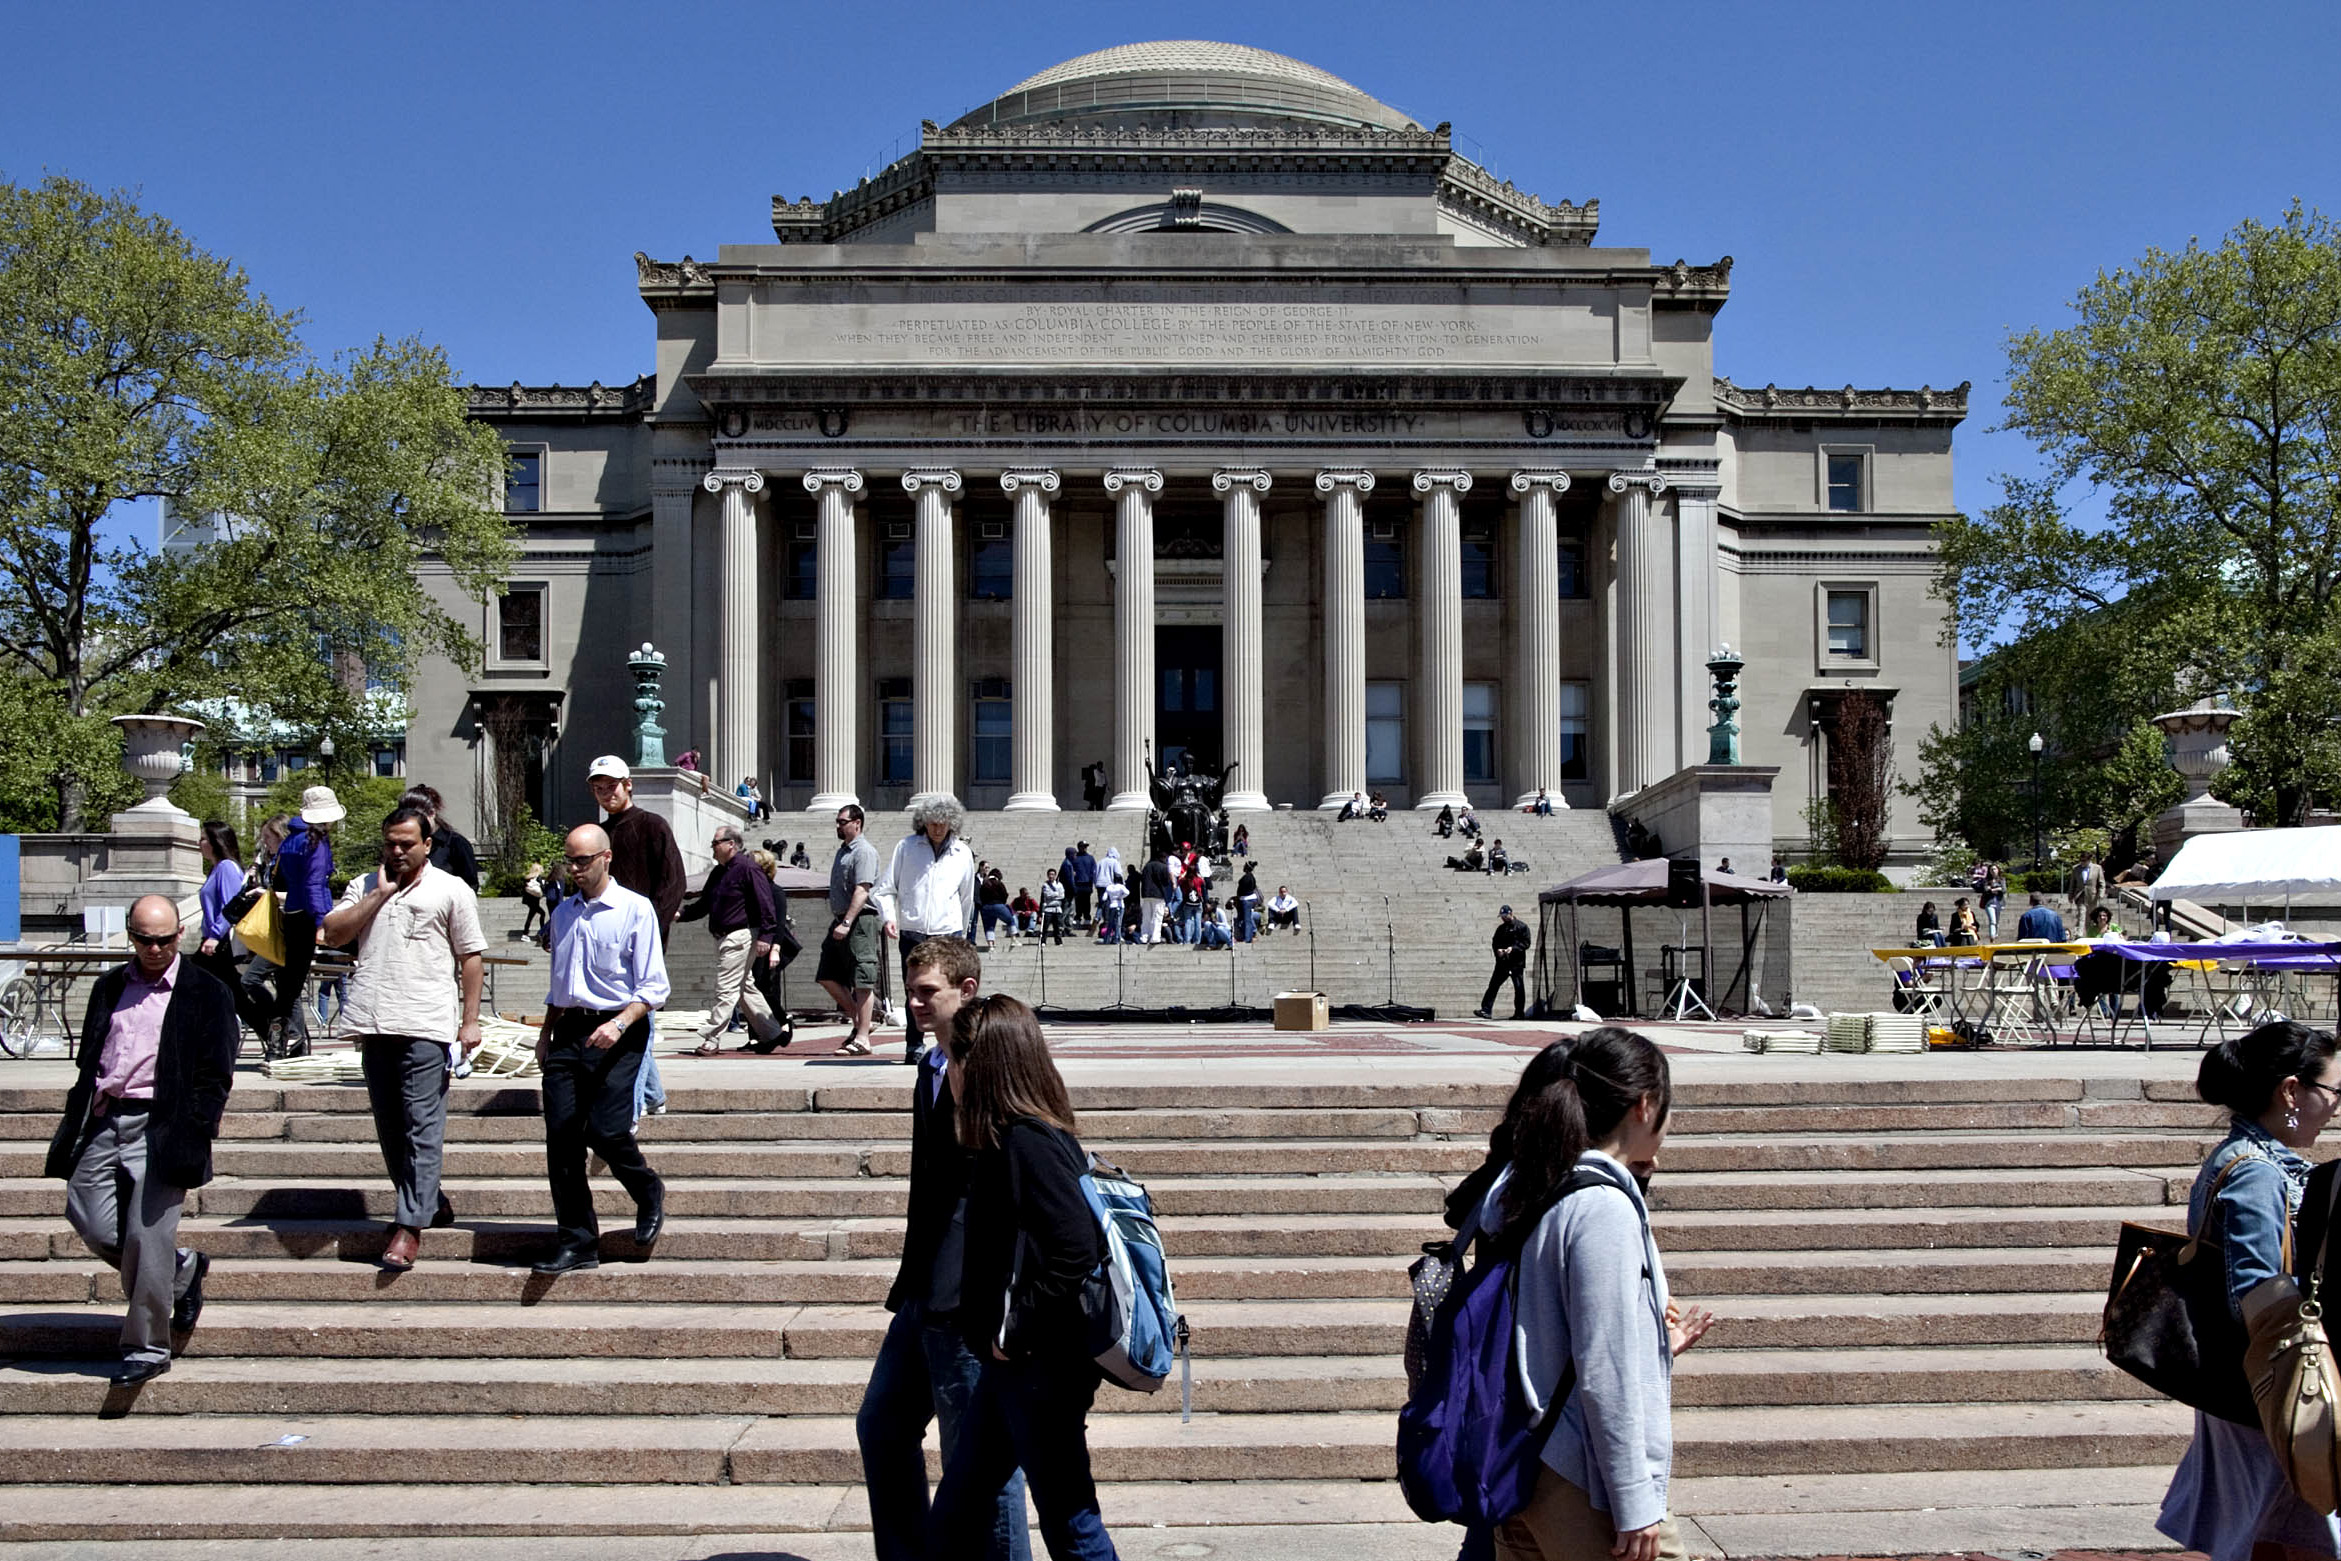 Students and pedestrians walk outside the Low Memorial Library at the Columbia University campus in New York.